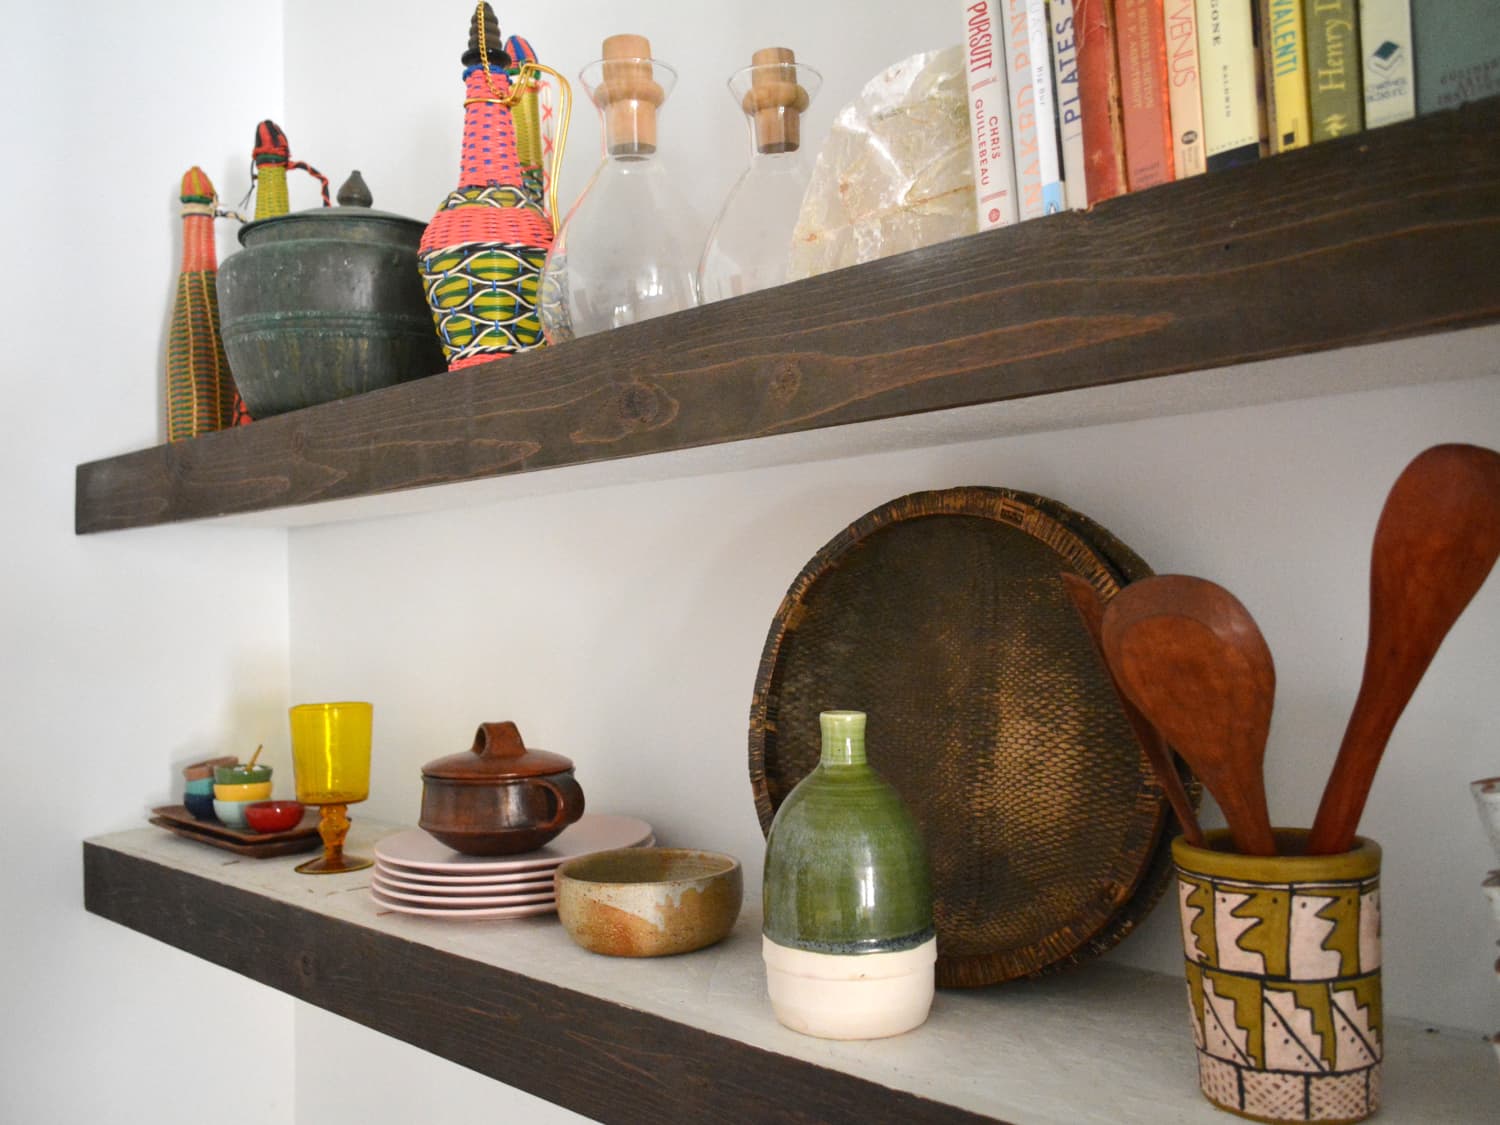 Floating Wooden Wall Shelves Metal Fixing Without Drilling Under